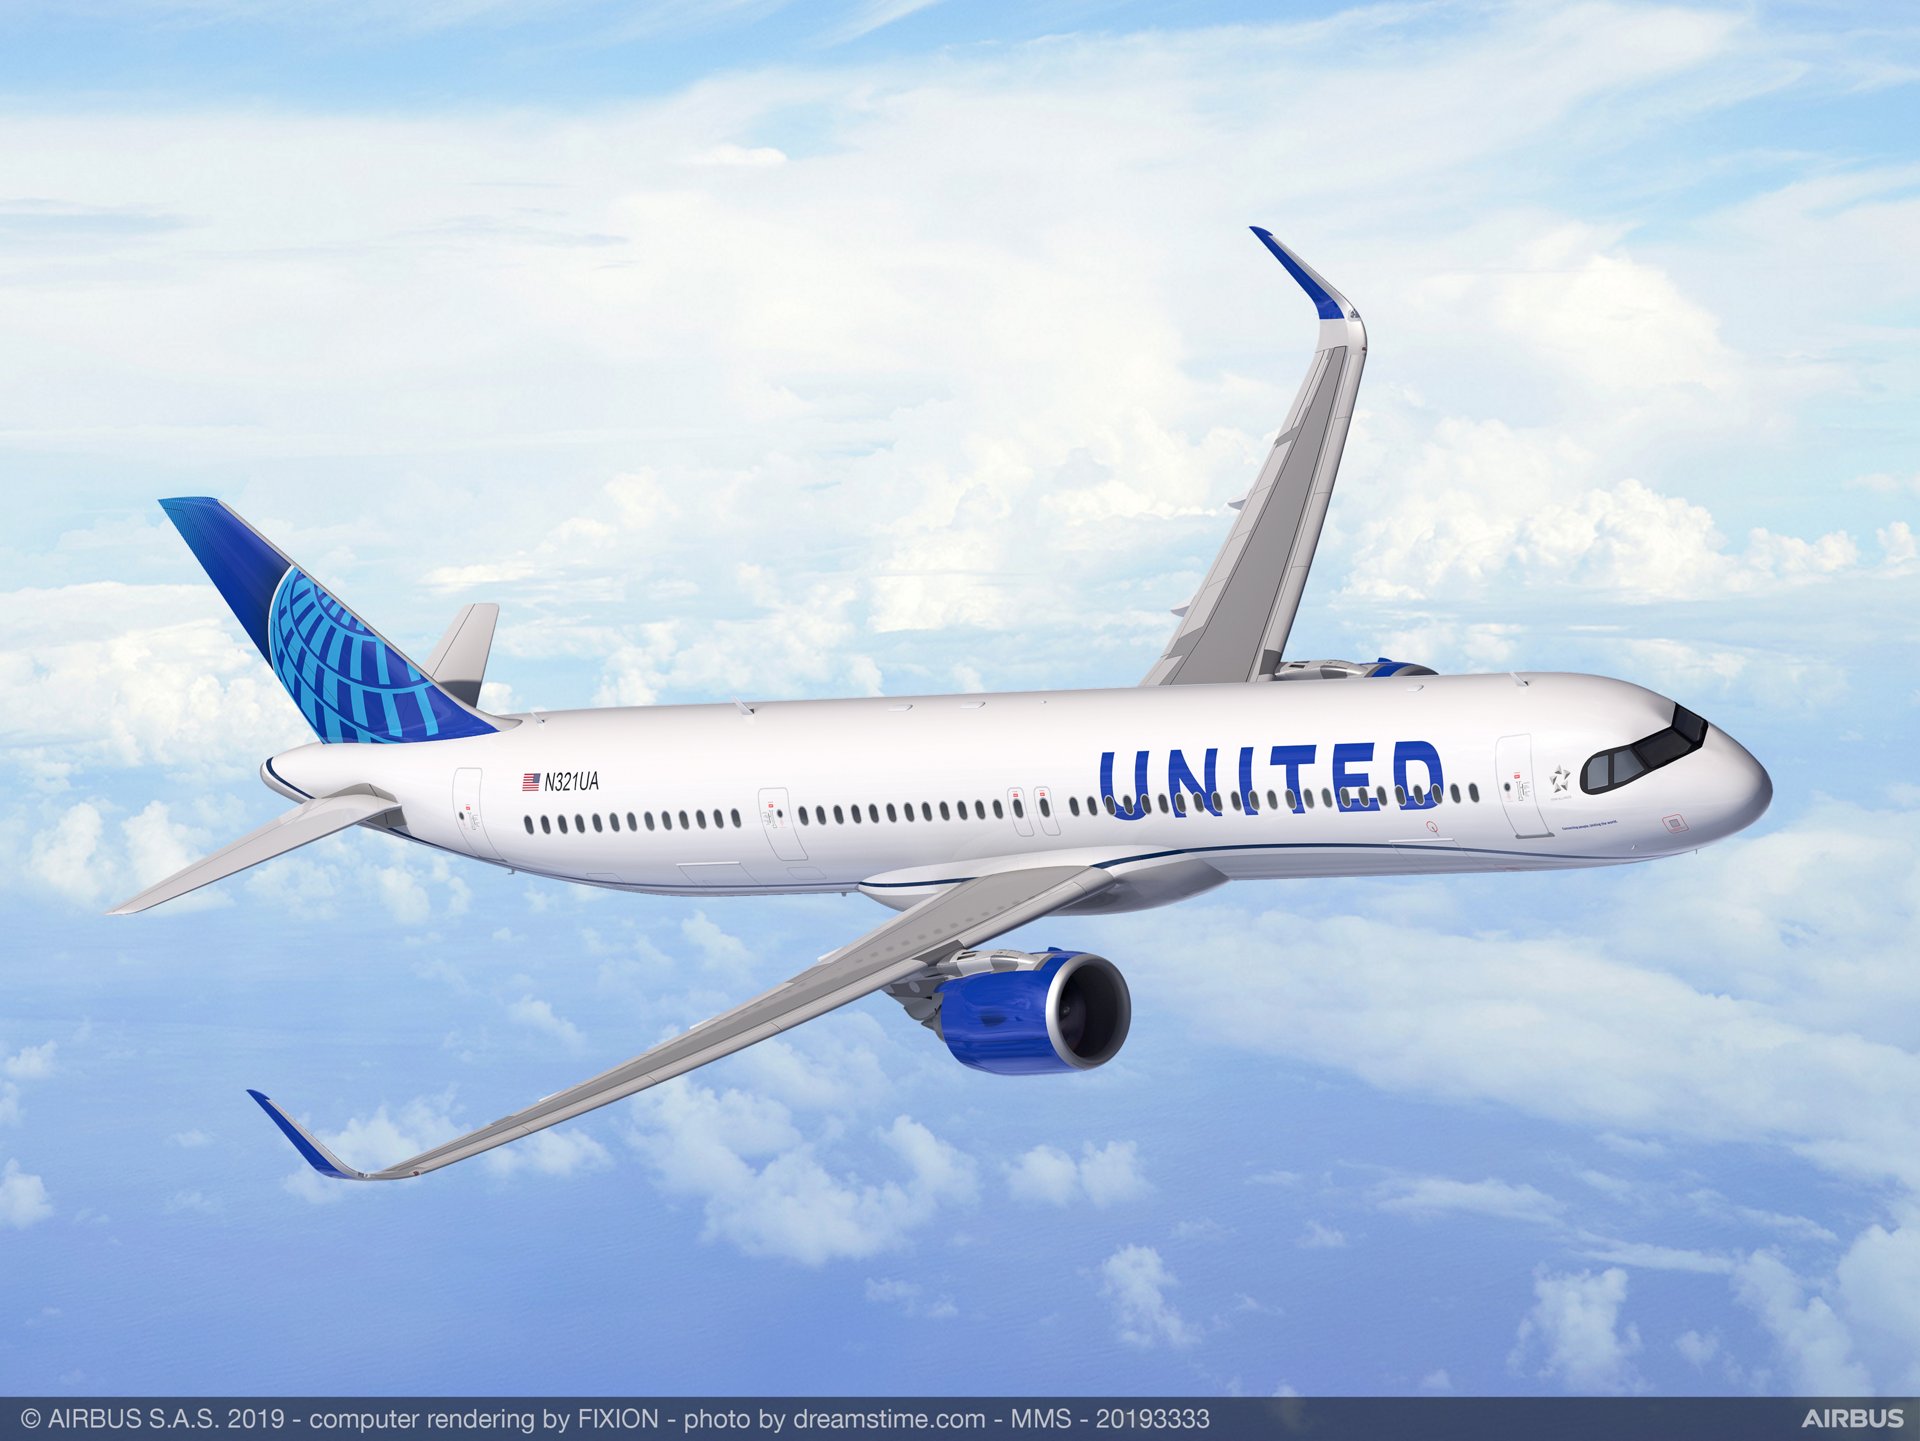 United Airlines Orders 50 Airbus A321xlrs For Transatlantic Route Expansion Commercial Aircraft Airbus